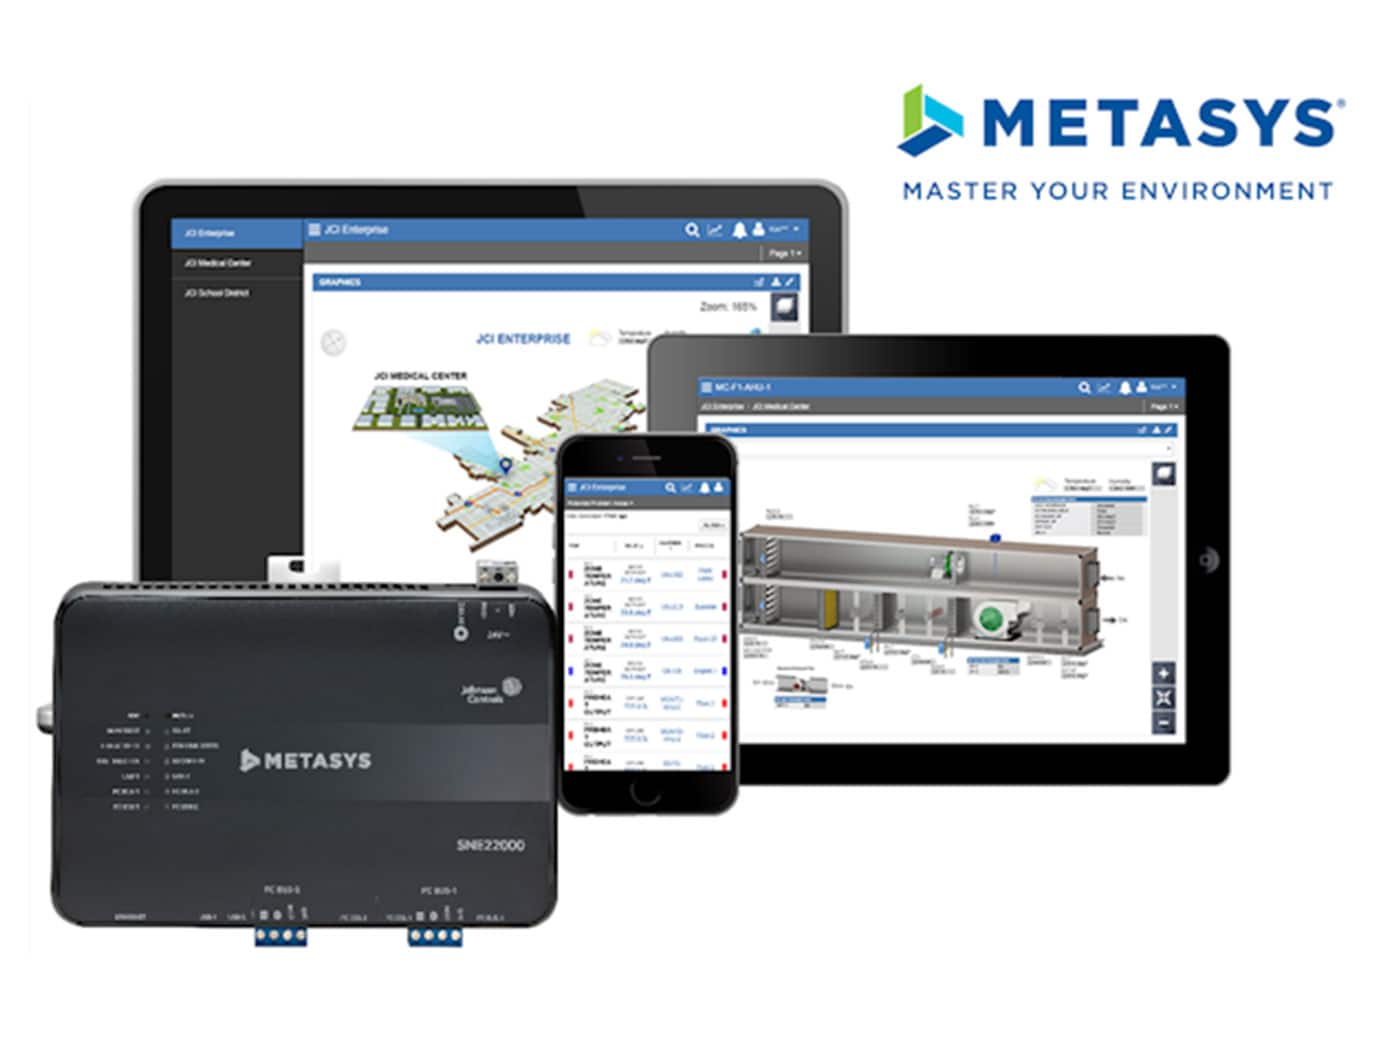 Metasys Building Automation and Energy Management System - Master Your Environment